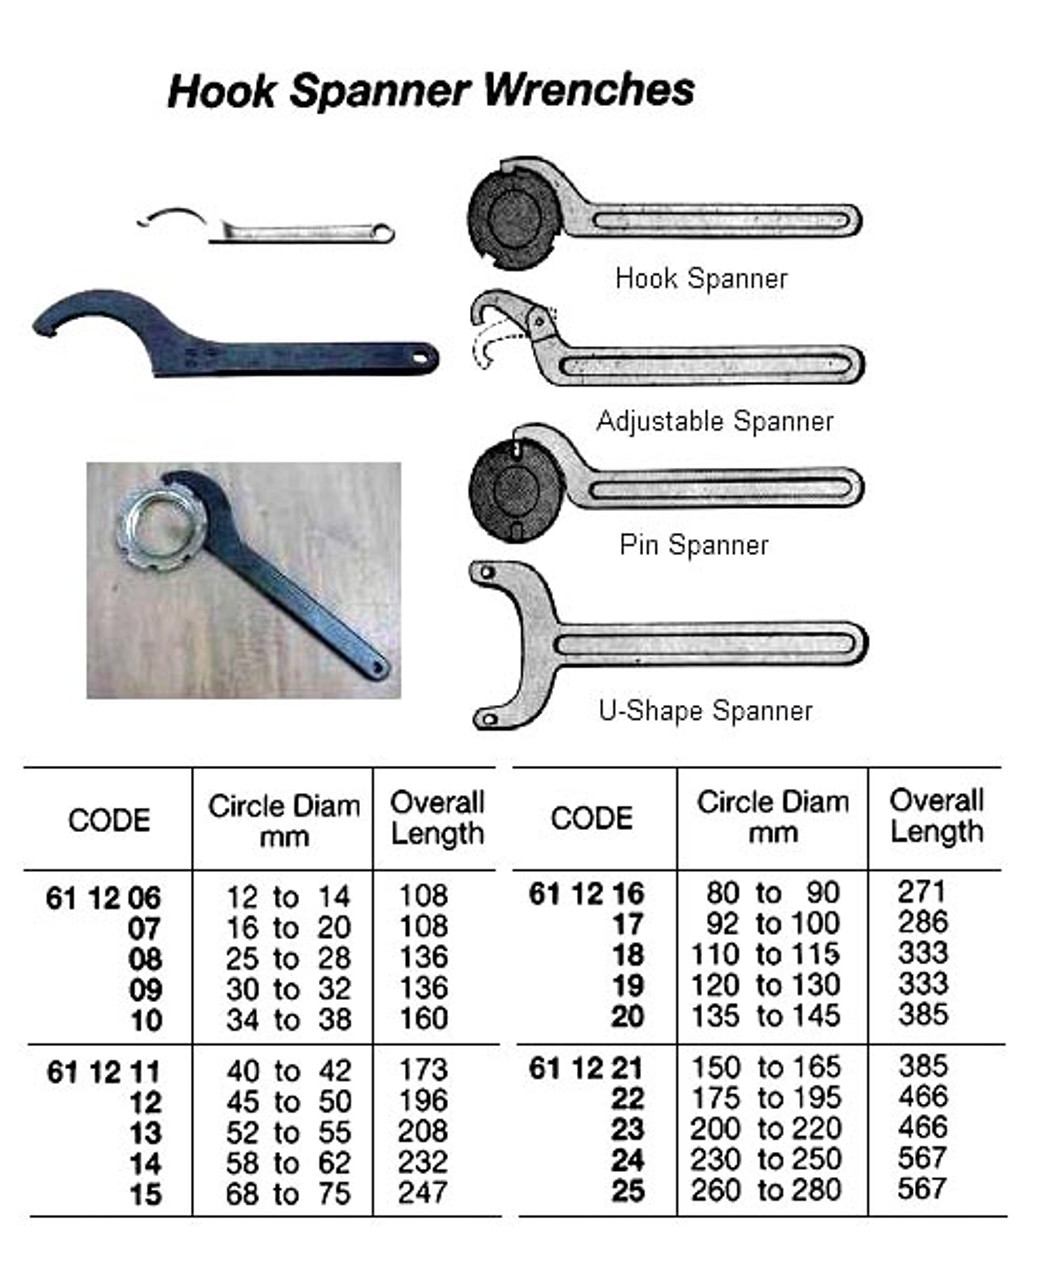 IMPA 611210 WRENCH HOOK SPANNER 34-38MM